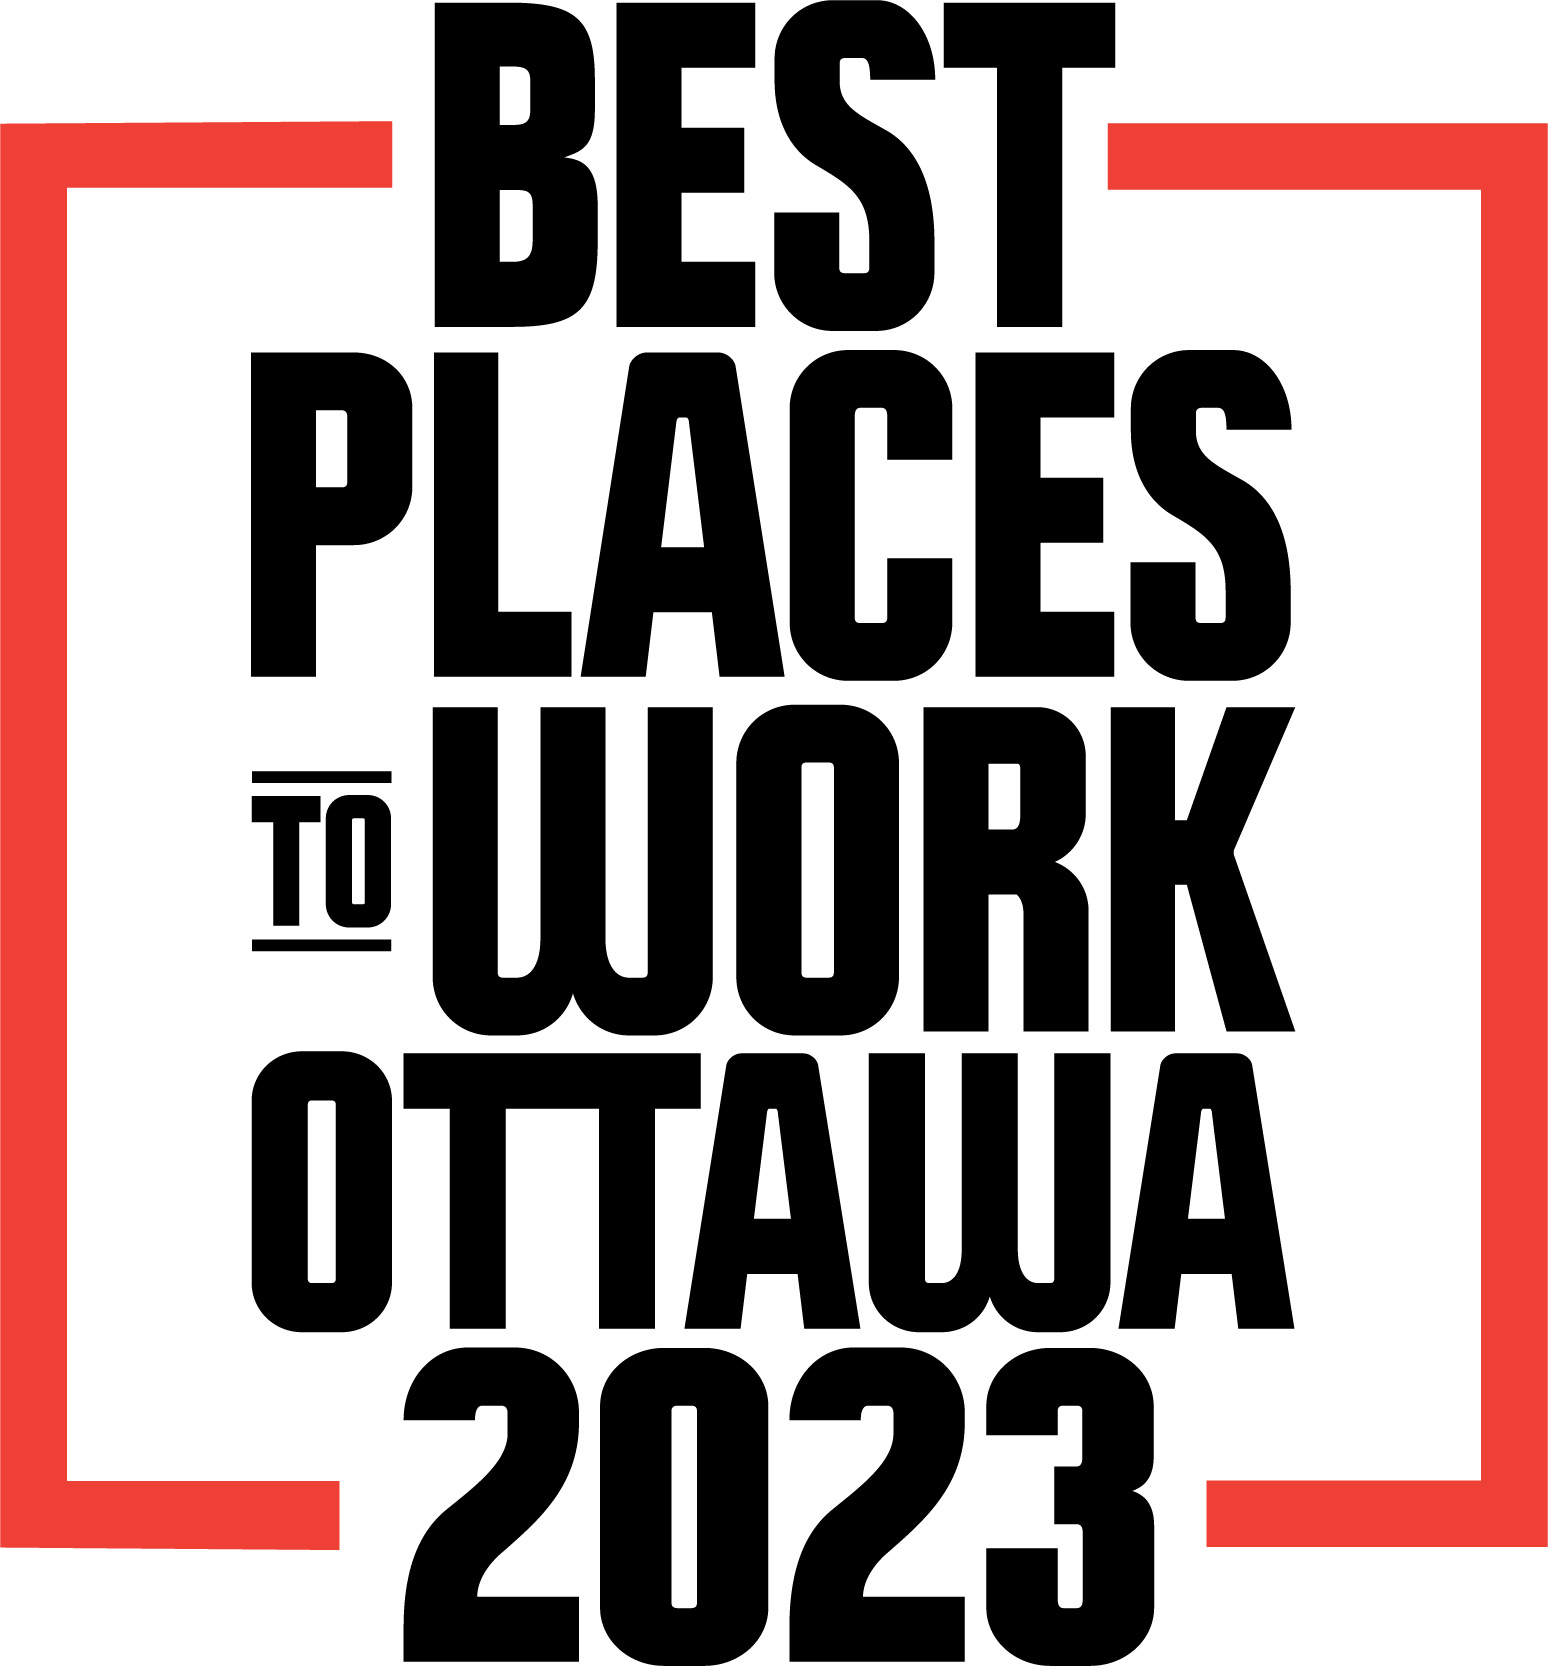 Ottawa's Best Places to Work 2023